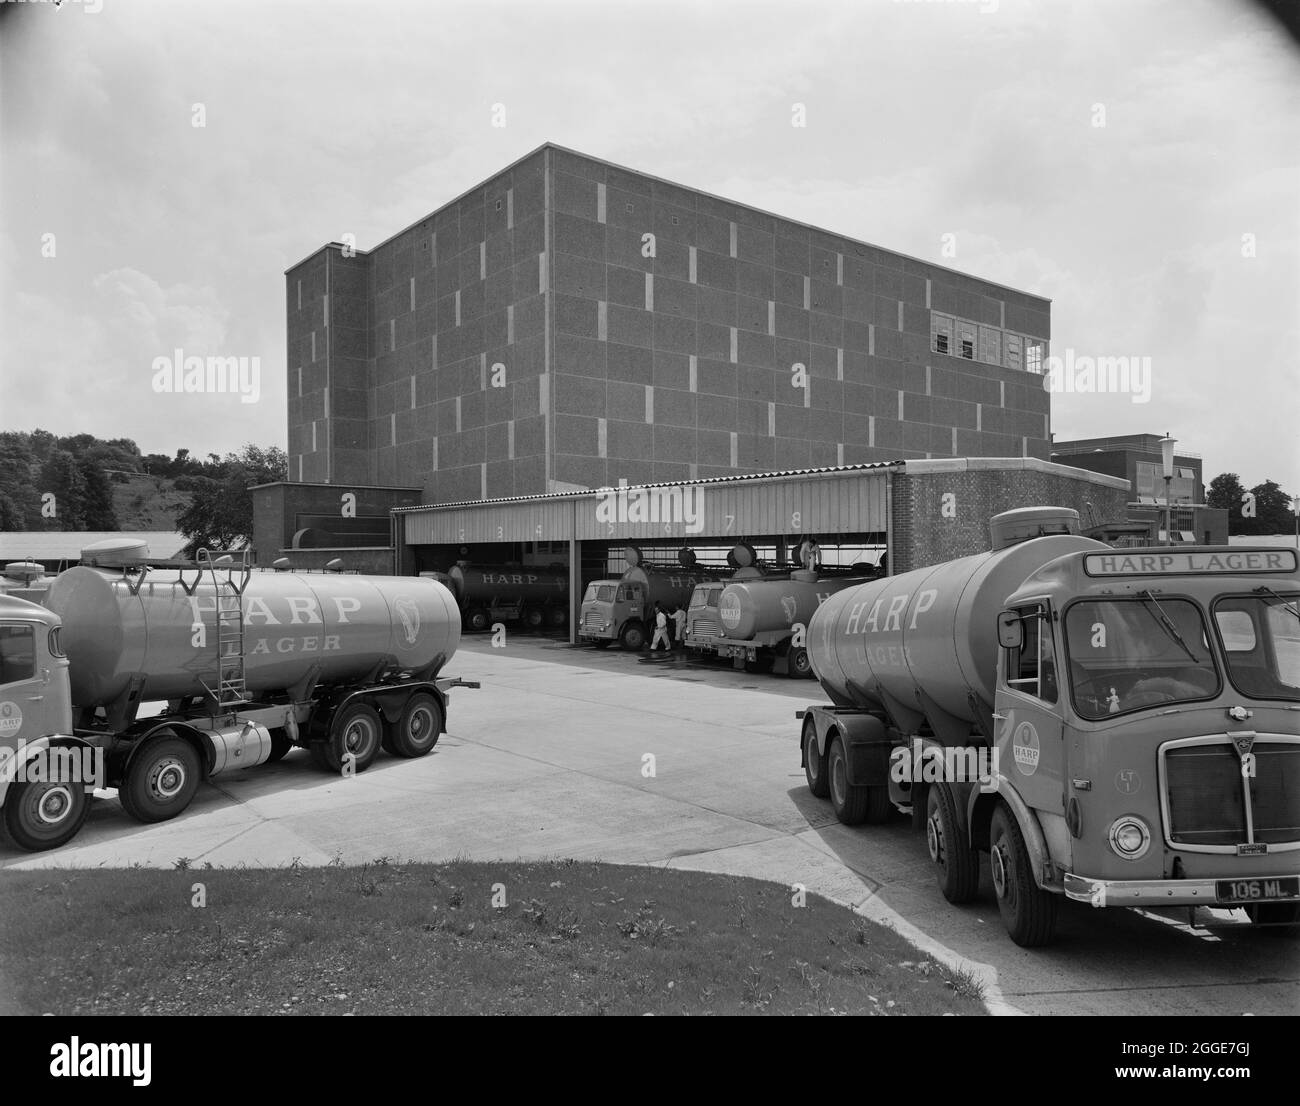 A view of tankers parked outside the new Harp Lager Brewery. The new brewery for Harp Lager at Manor Park was built by Laing with the design of the project being carried out by architects and engineers from the Group Technical Services, working with engineers from Arthur Guinness, Son and Company Limited. John Laing Construction Ltd began the building work in 1961 and the brewery was opened on 28th June 1963. The brewery was taken over by Bass in 1979, then later by Molson Coors, subsequently closing in 2015. Stock Photo